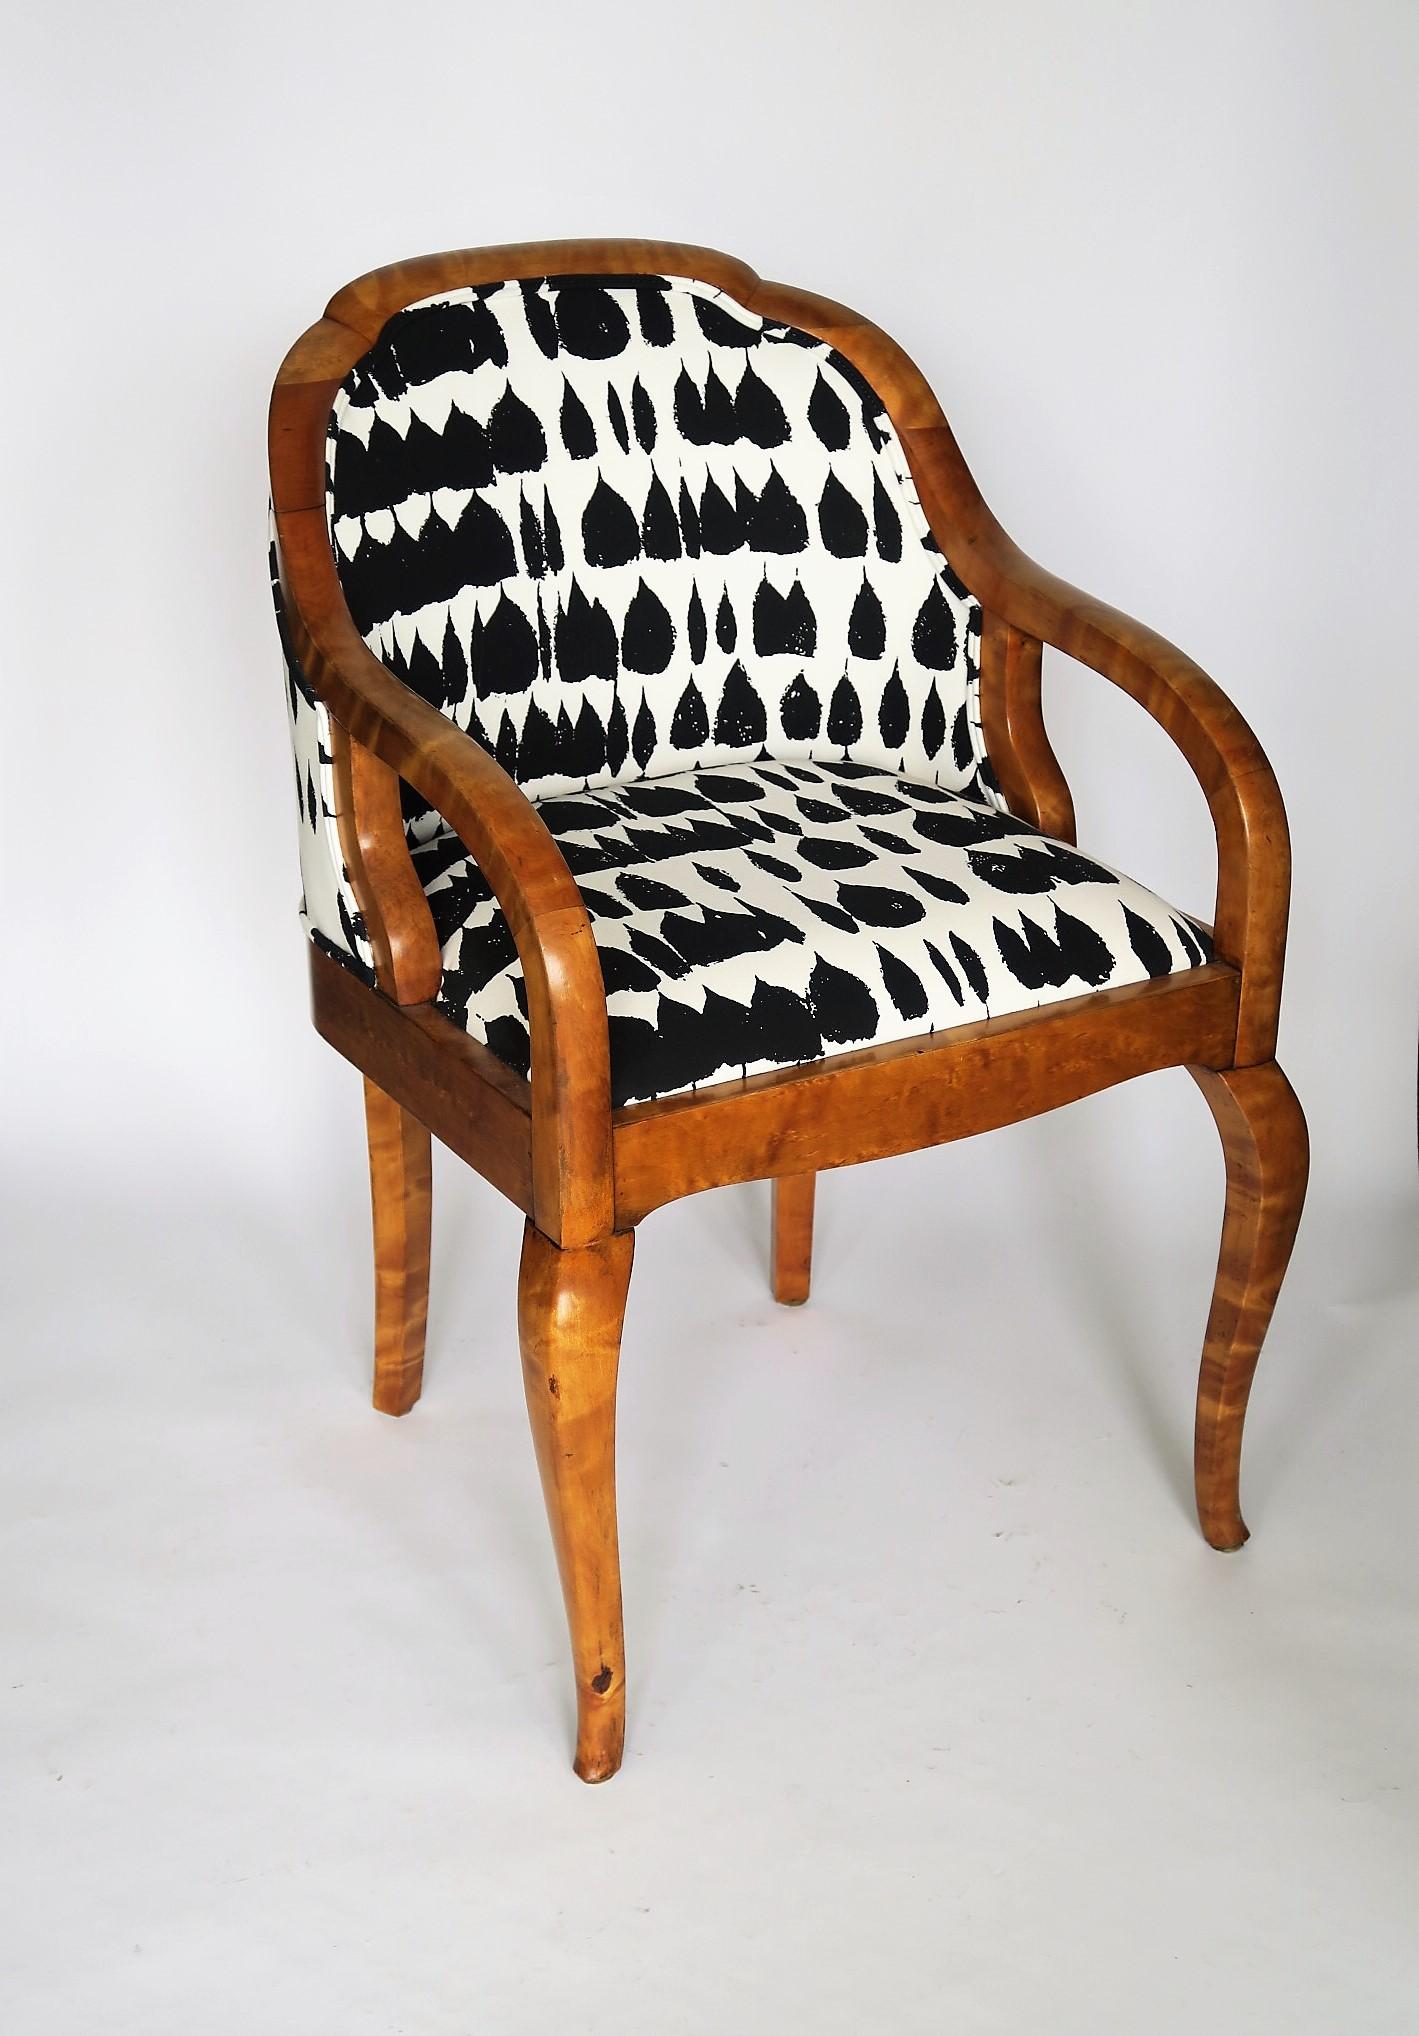 Single 19th century Swedish Biedermeier armchair constructed of birch wood and newly upholstered in Schumacher 